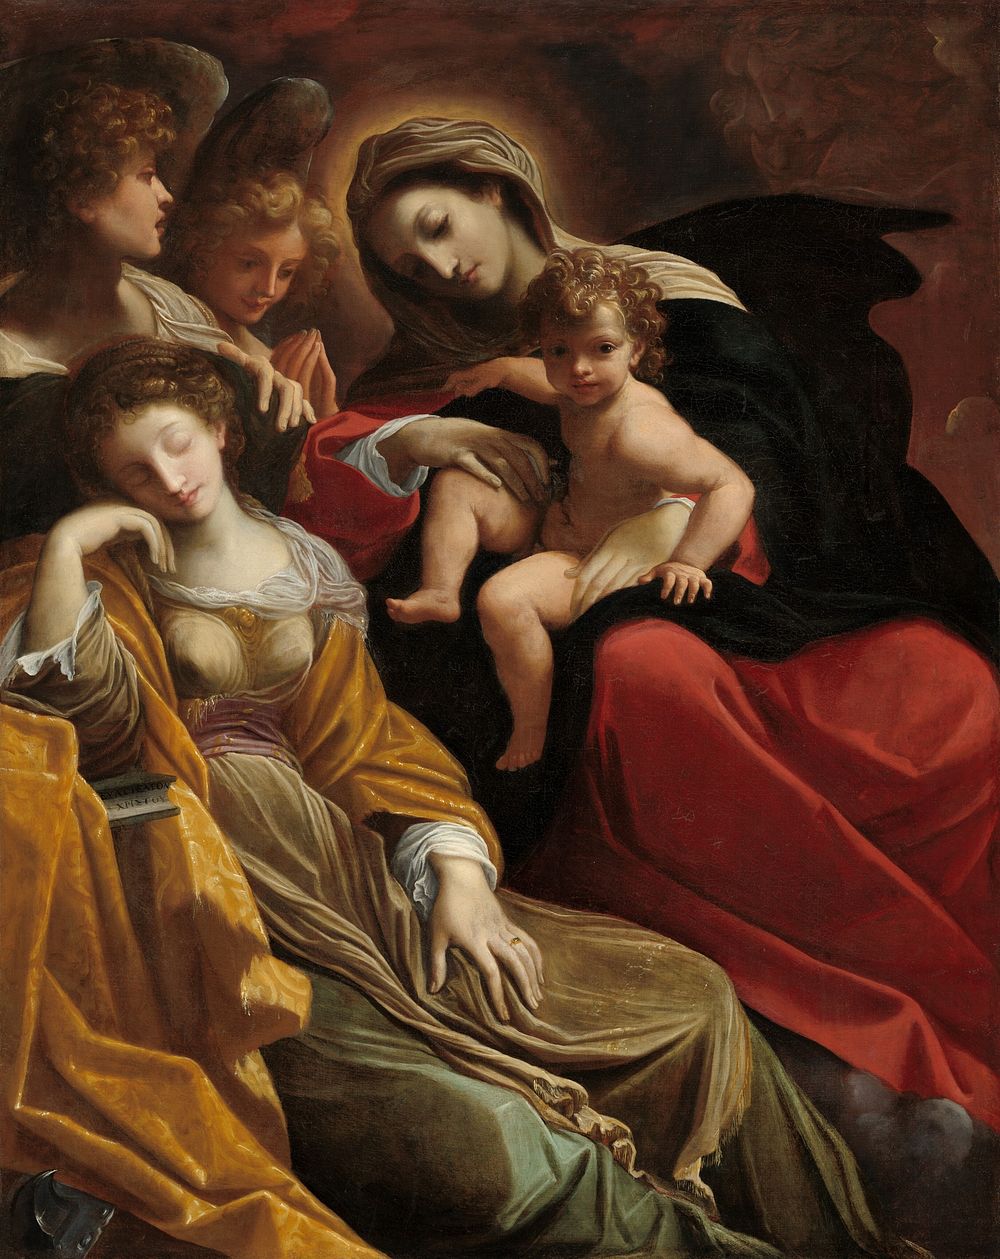 The Dream of Saint Catherine of Alexandria (ca. 1593) by Annibale Carracci.  